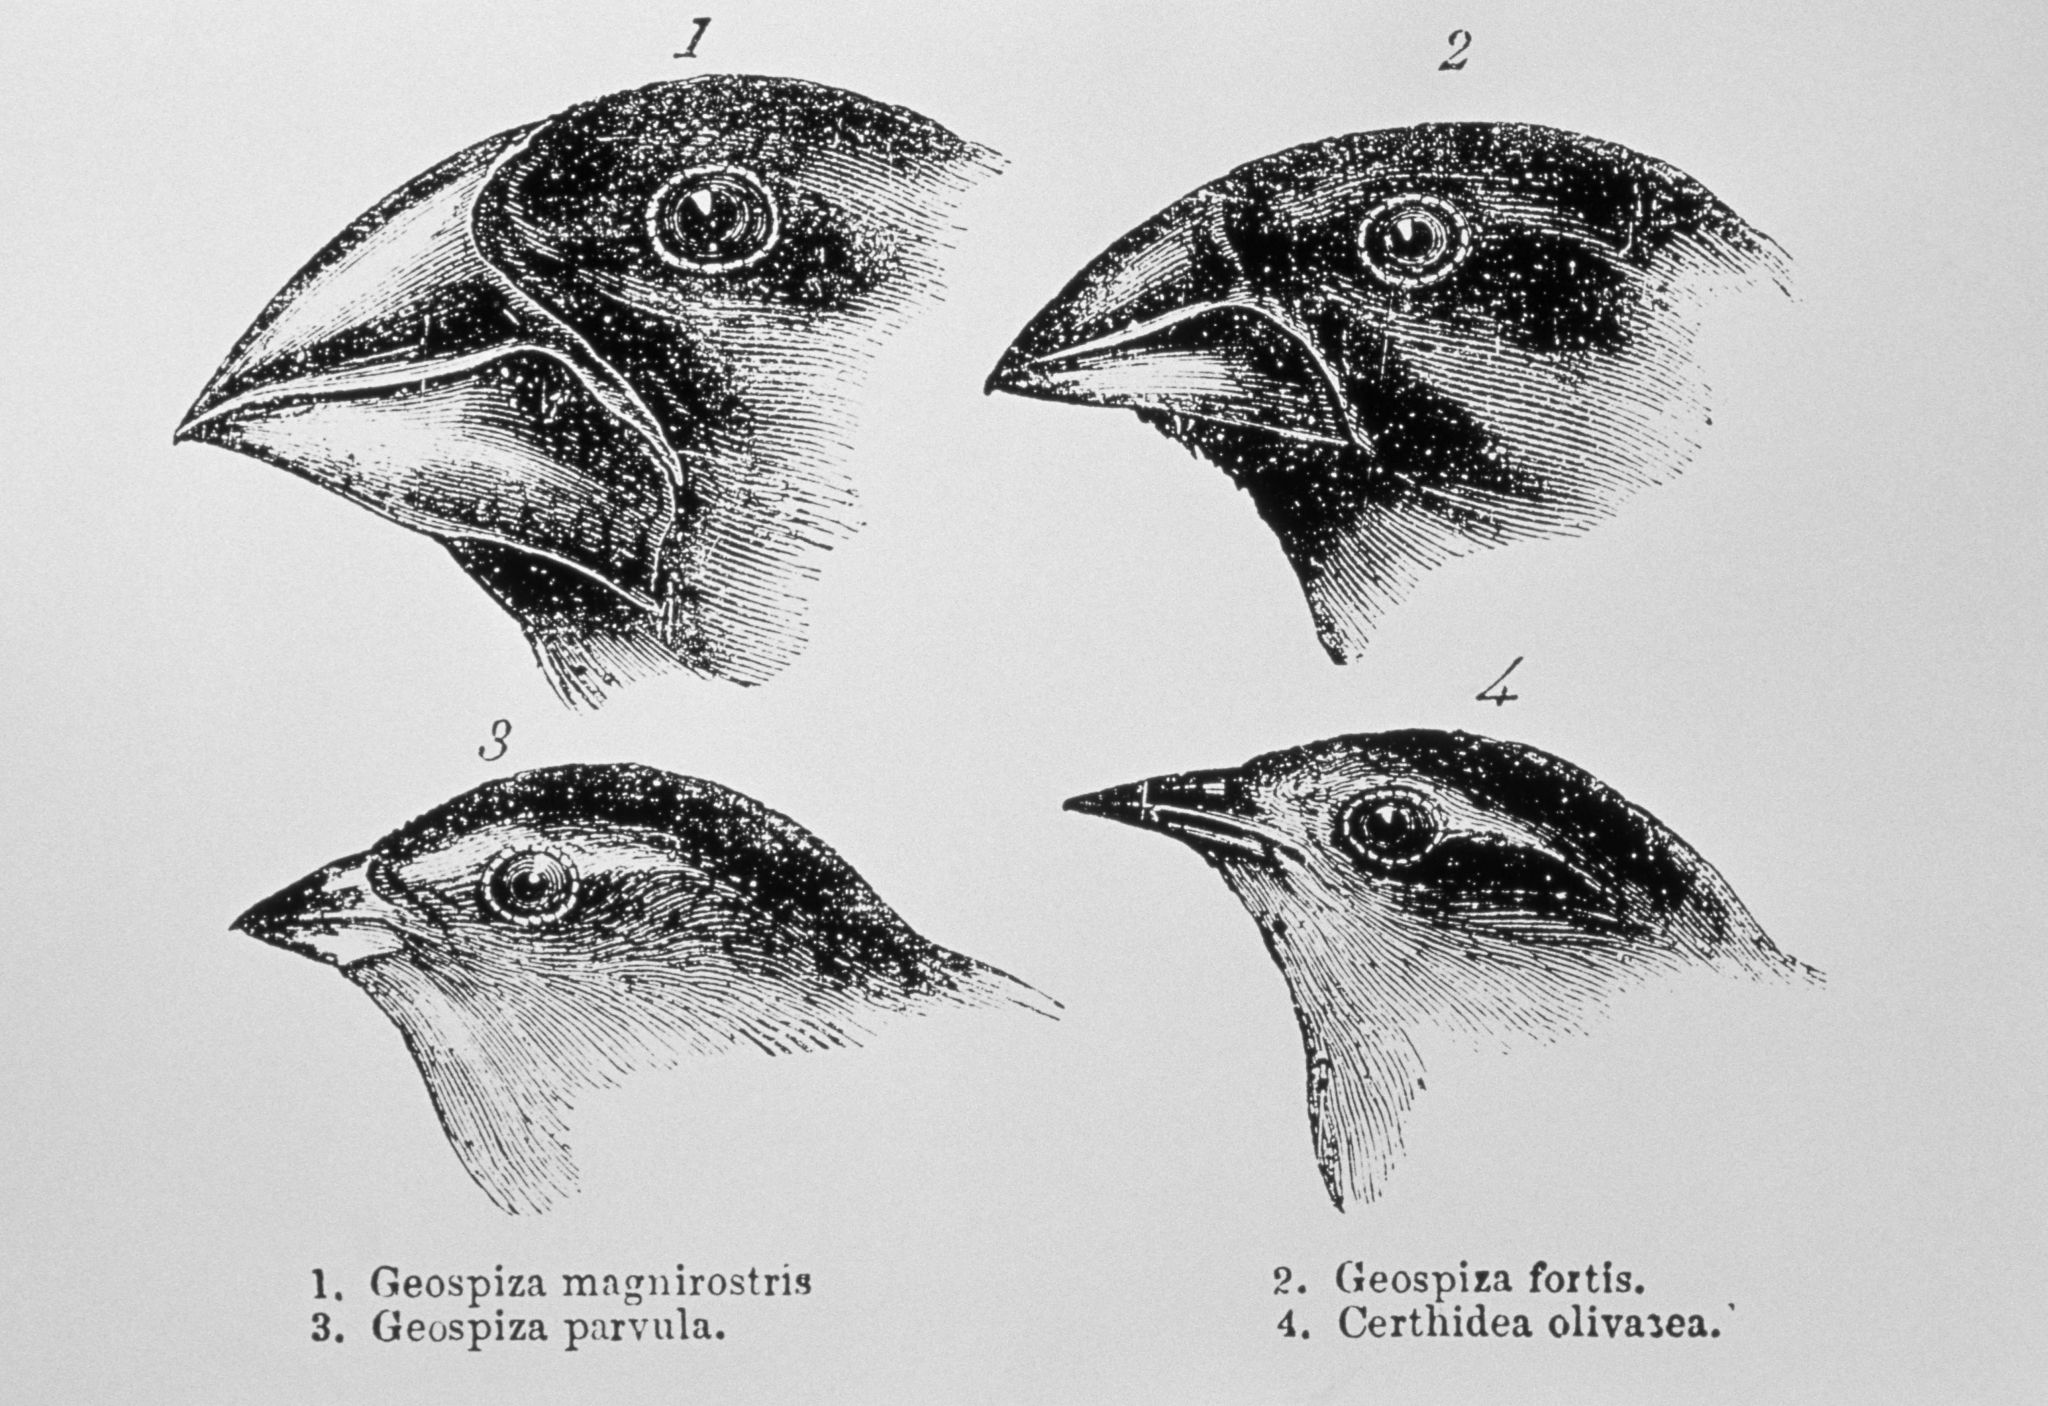 Evolution by Natural Selection Worksheet Also Charles Darwin S Finches and the theory Of Evolution